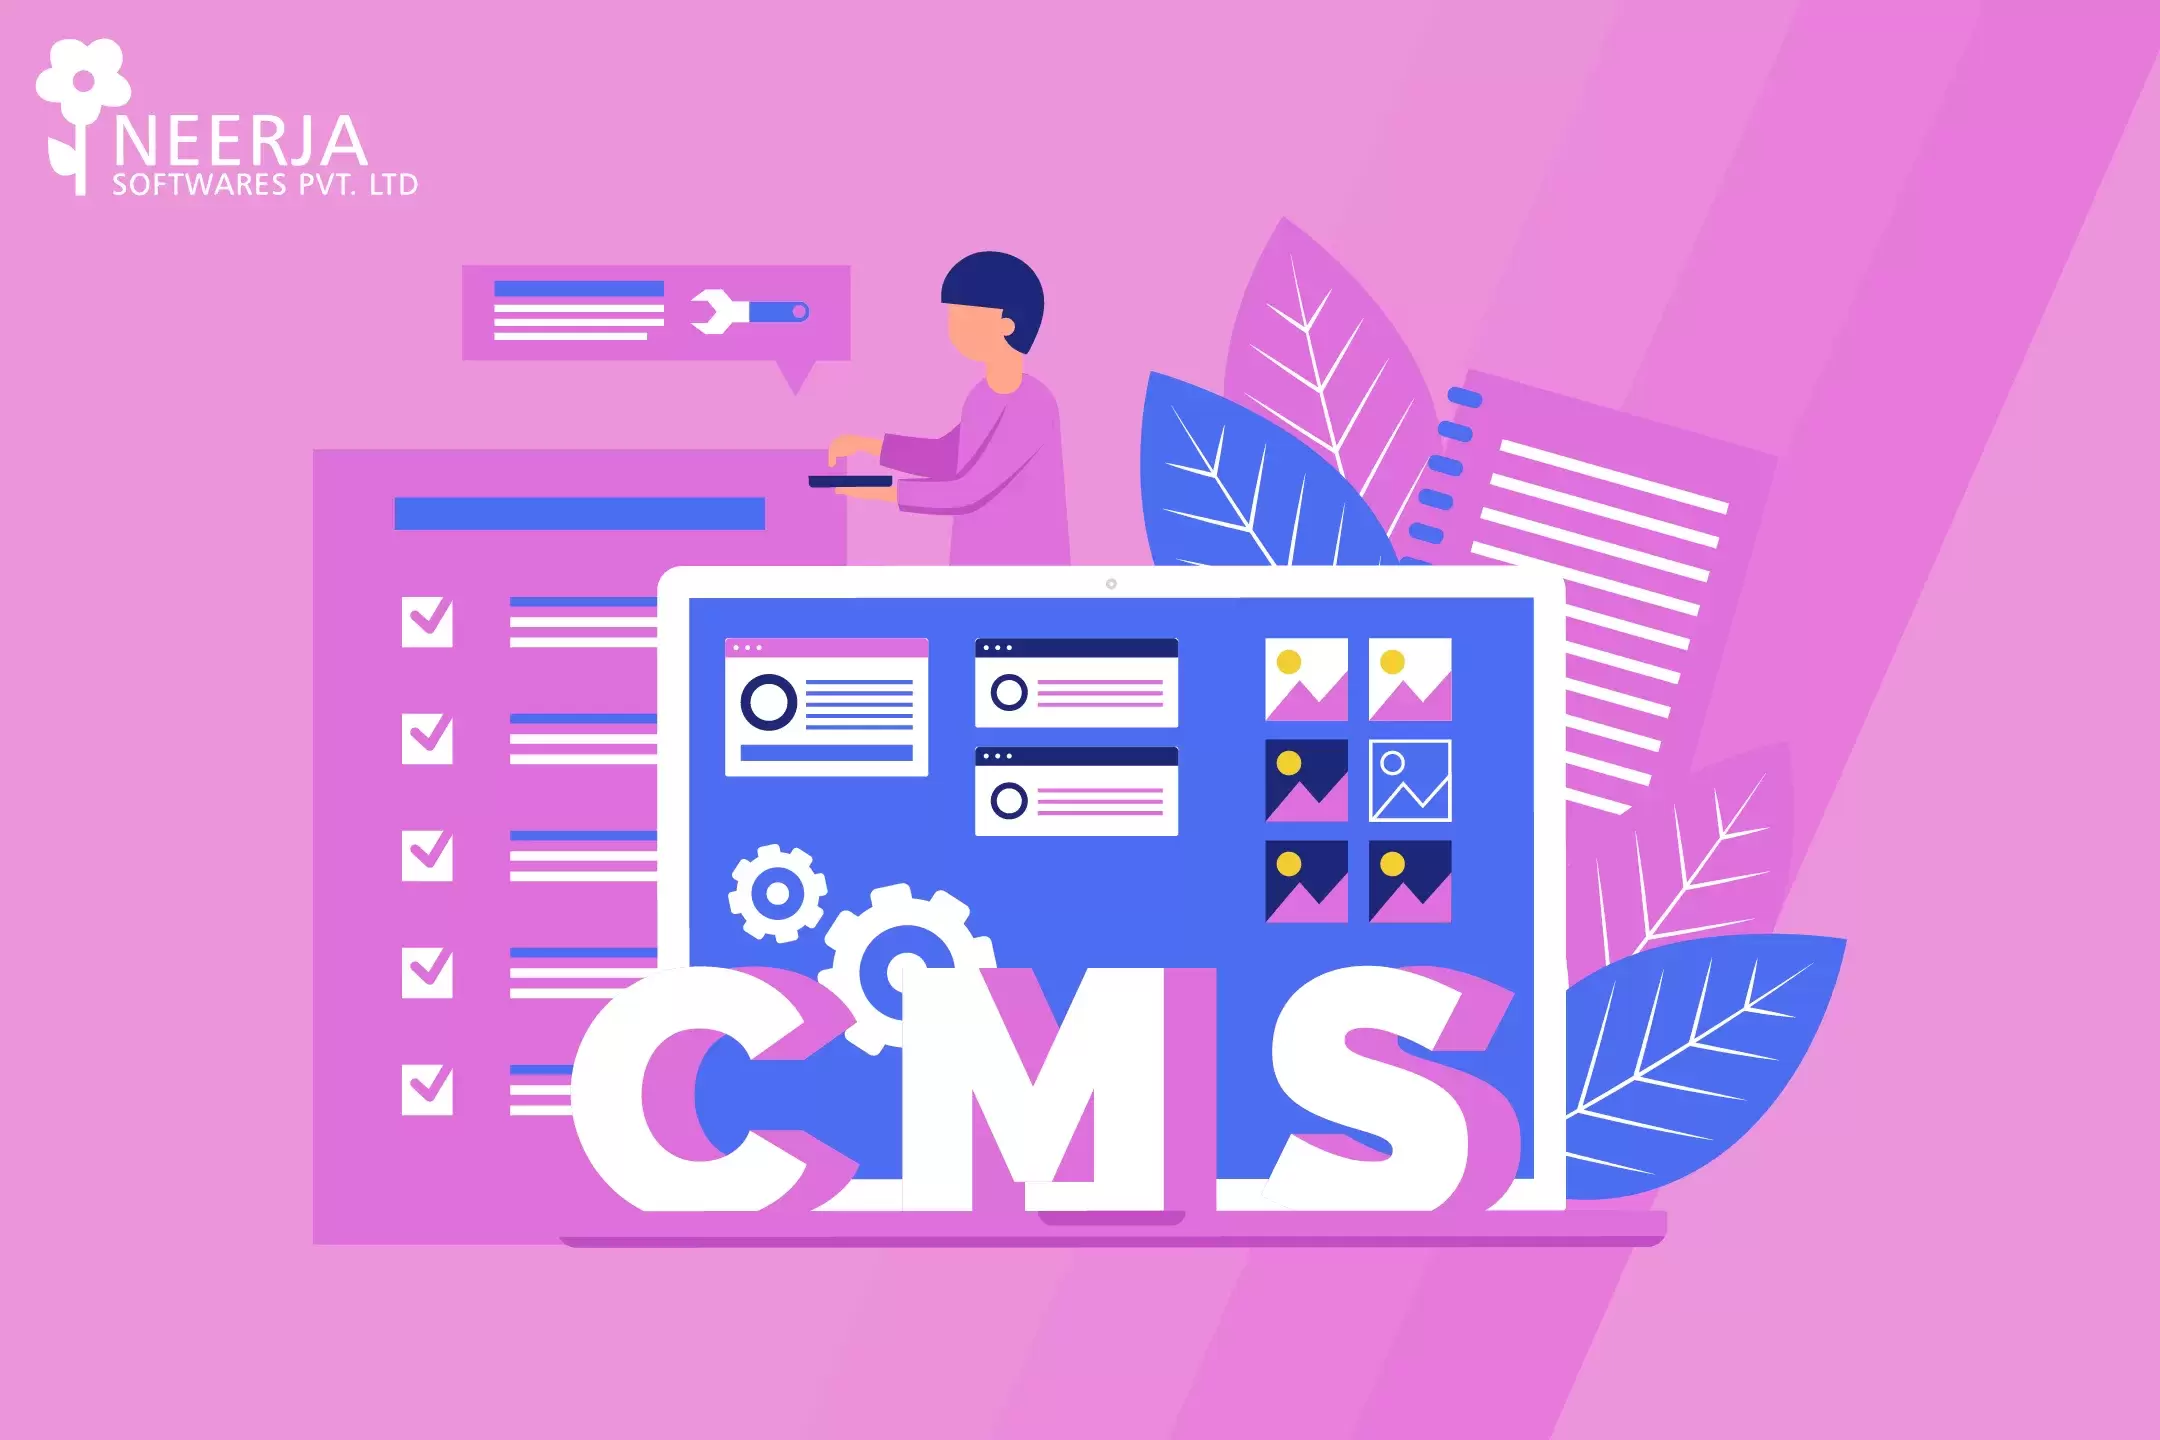 Why Drupal is Best for CMS (Content Management System)?